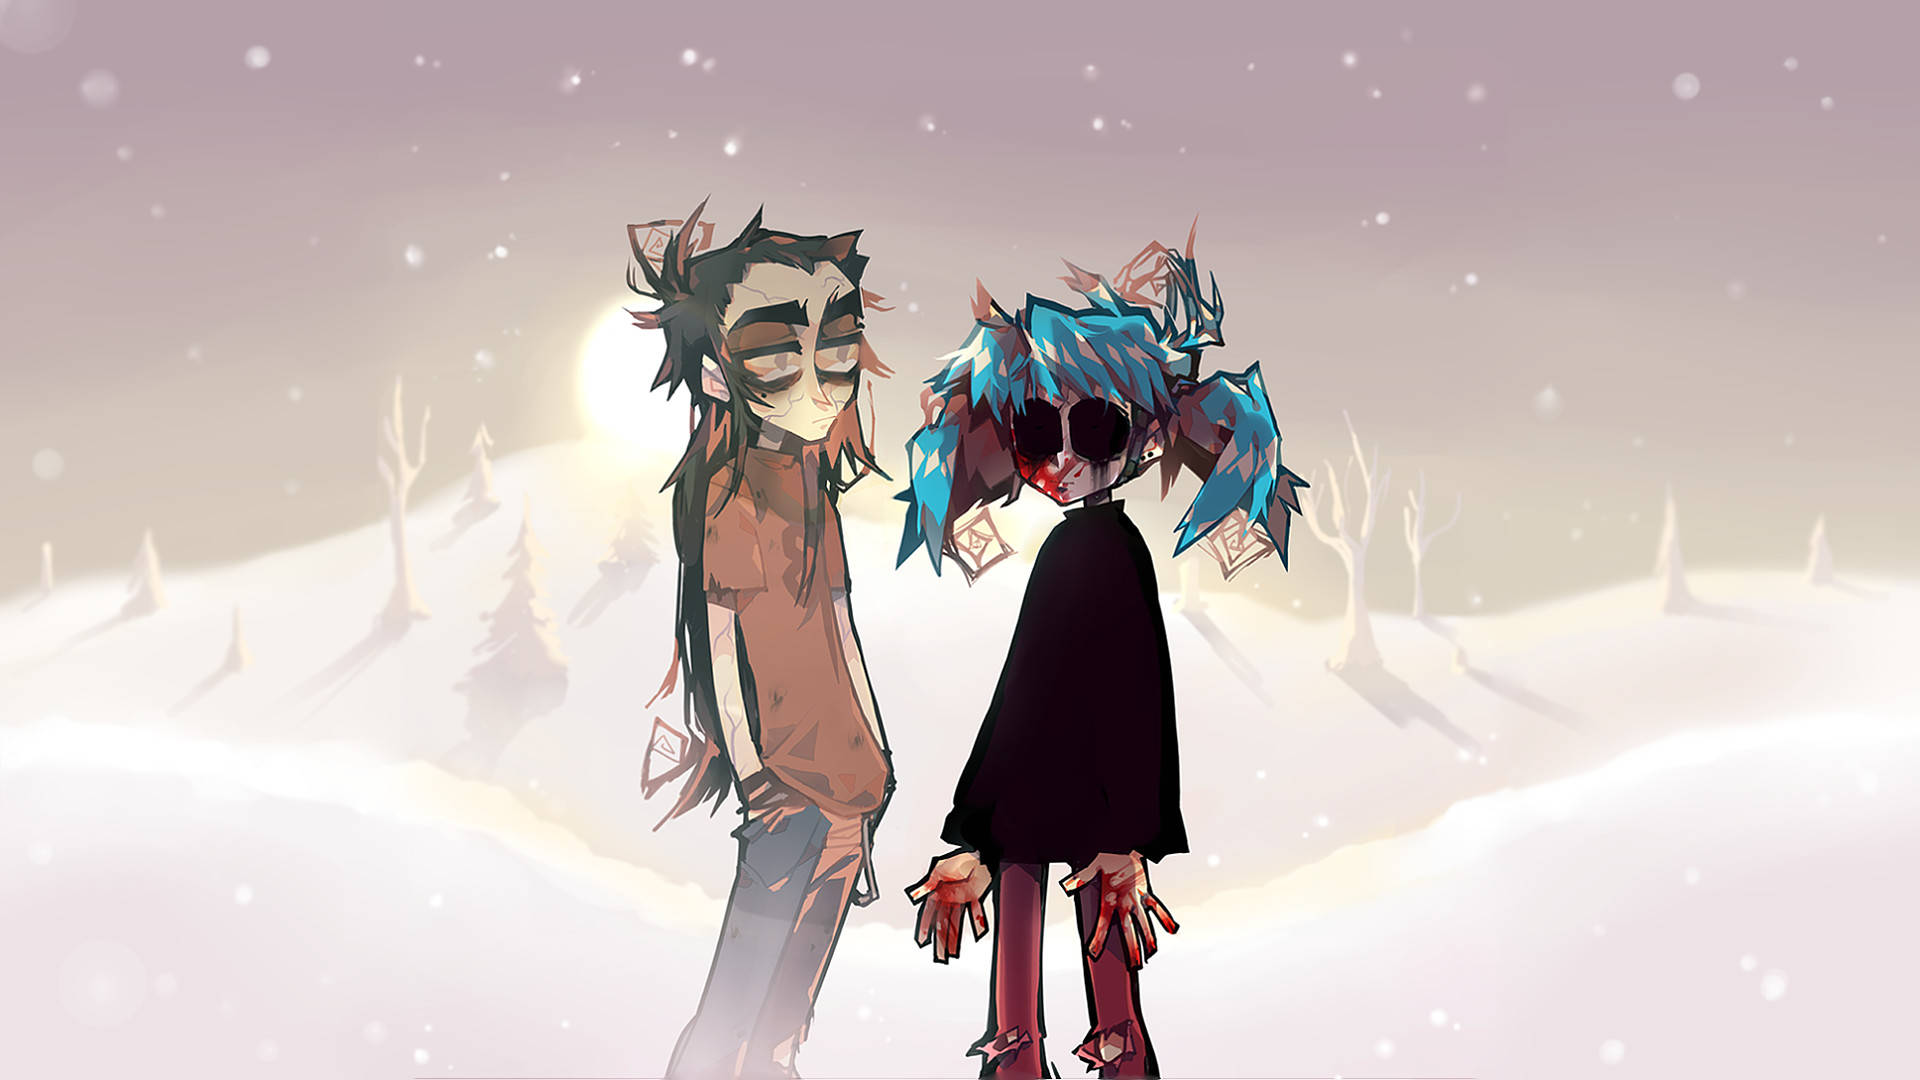 Sally Face And Larry During Winter Wallpaper